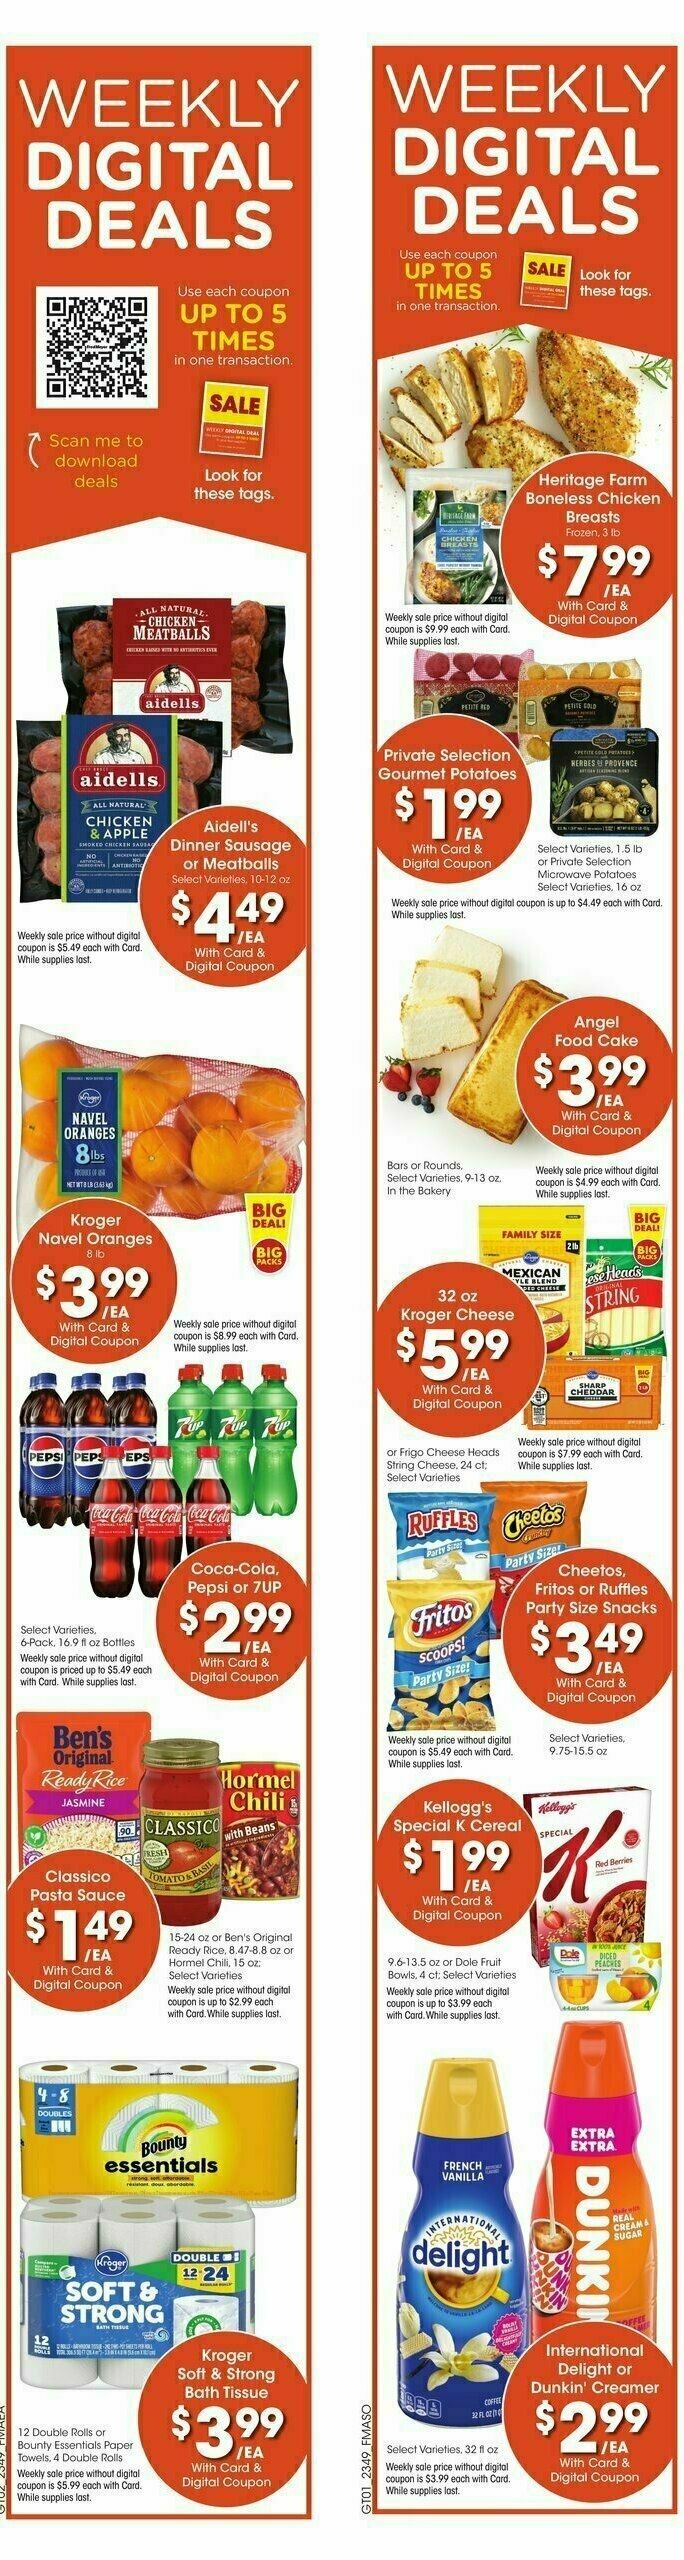 Fred Meyer Weekly Ad from January 3